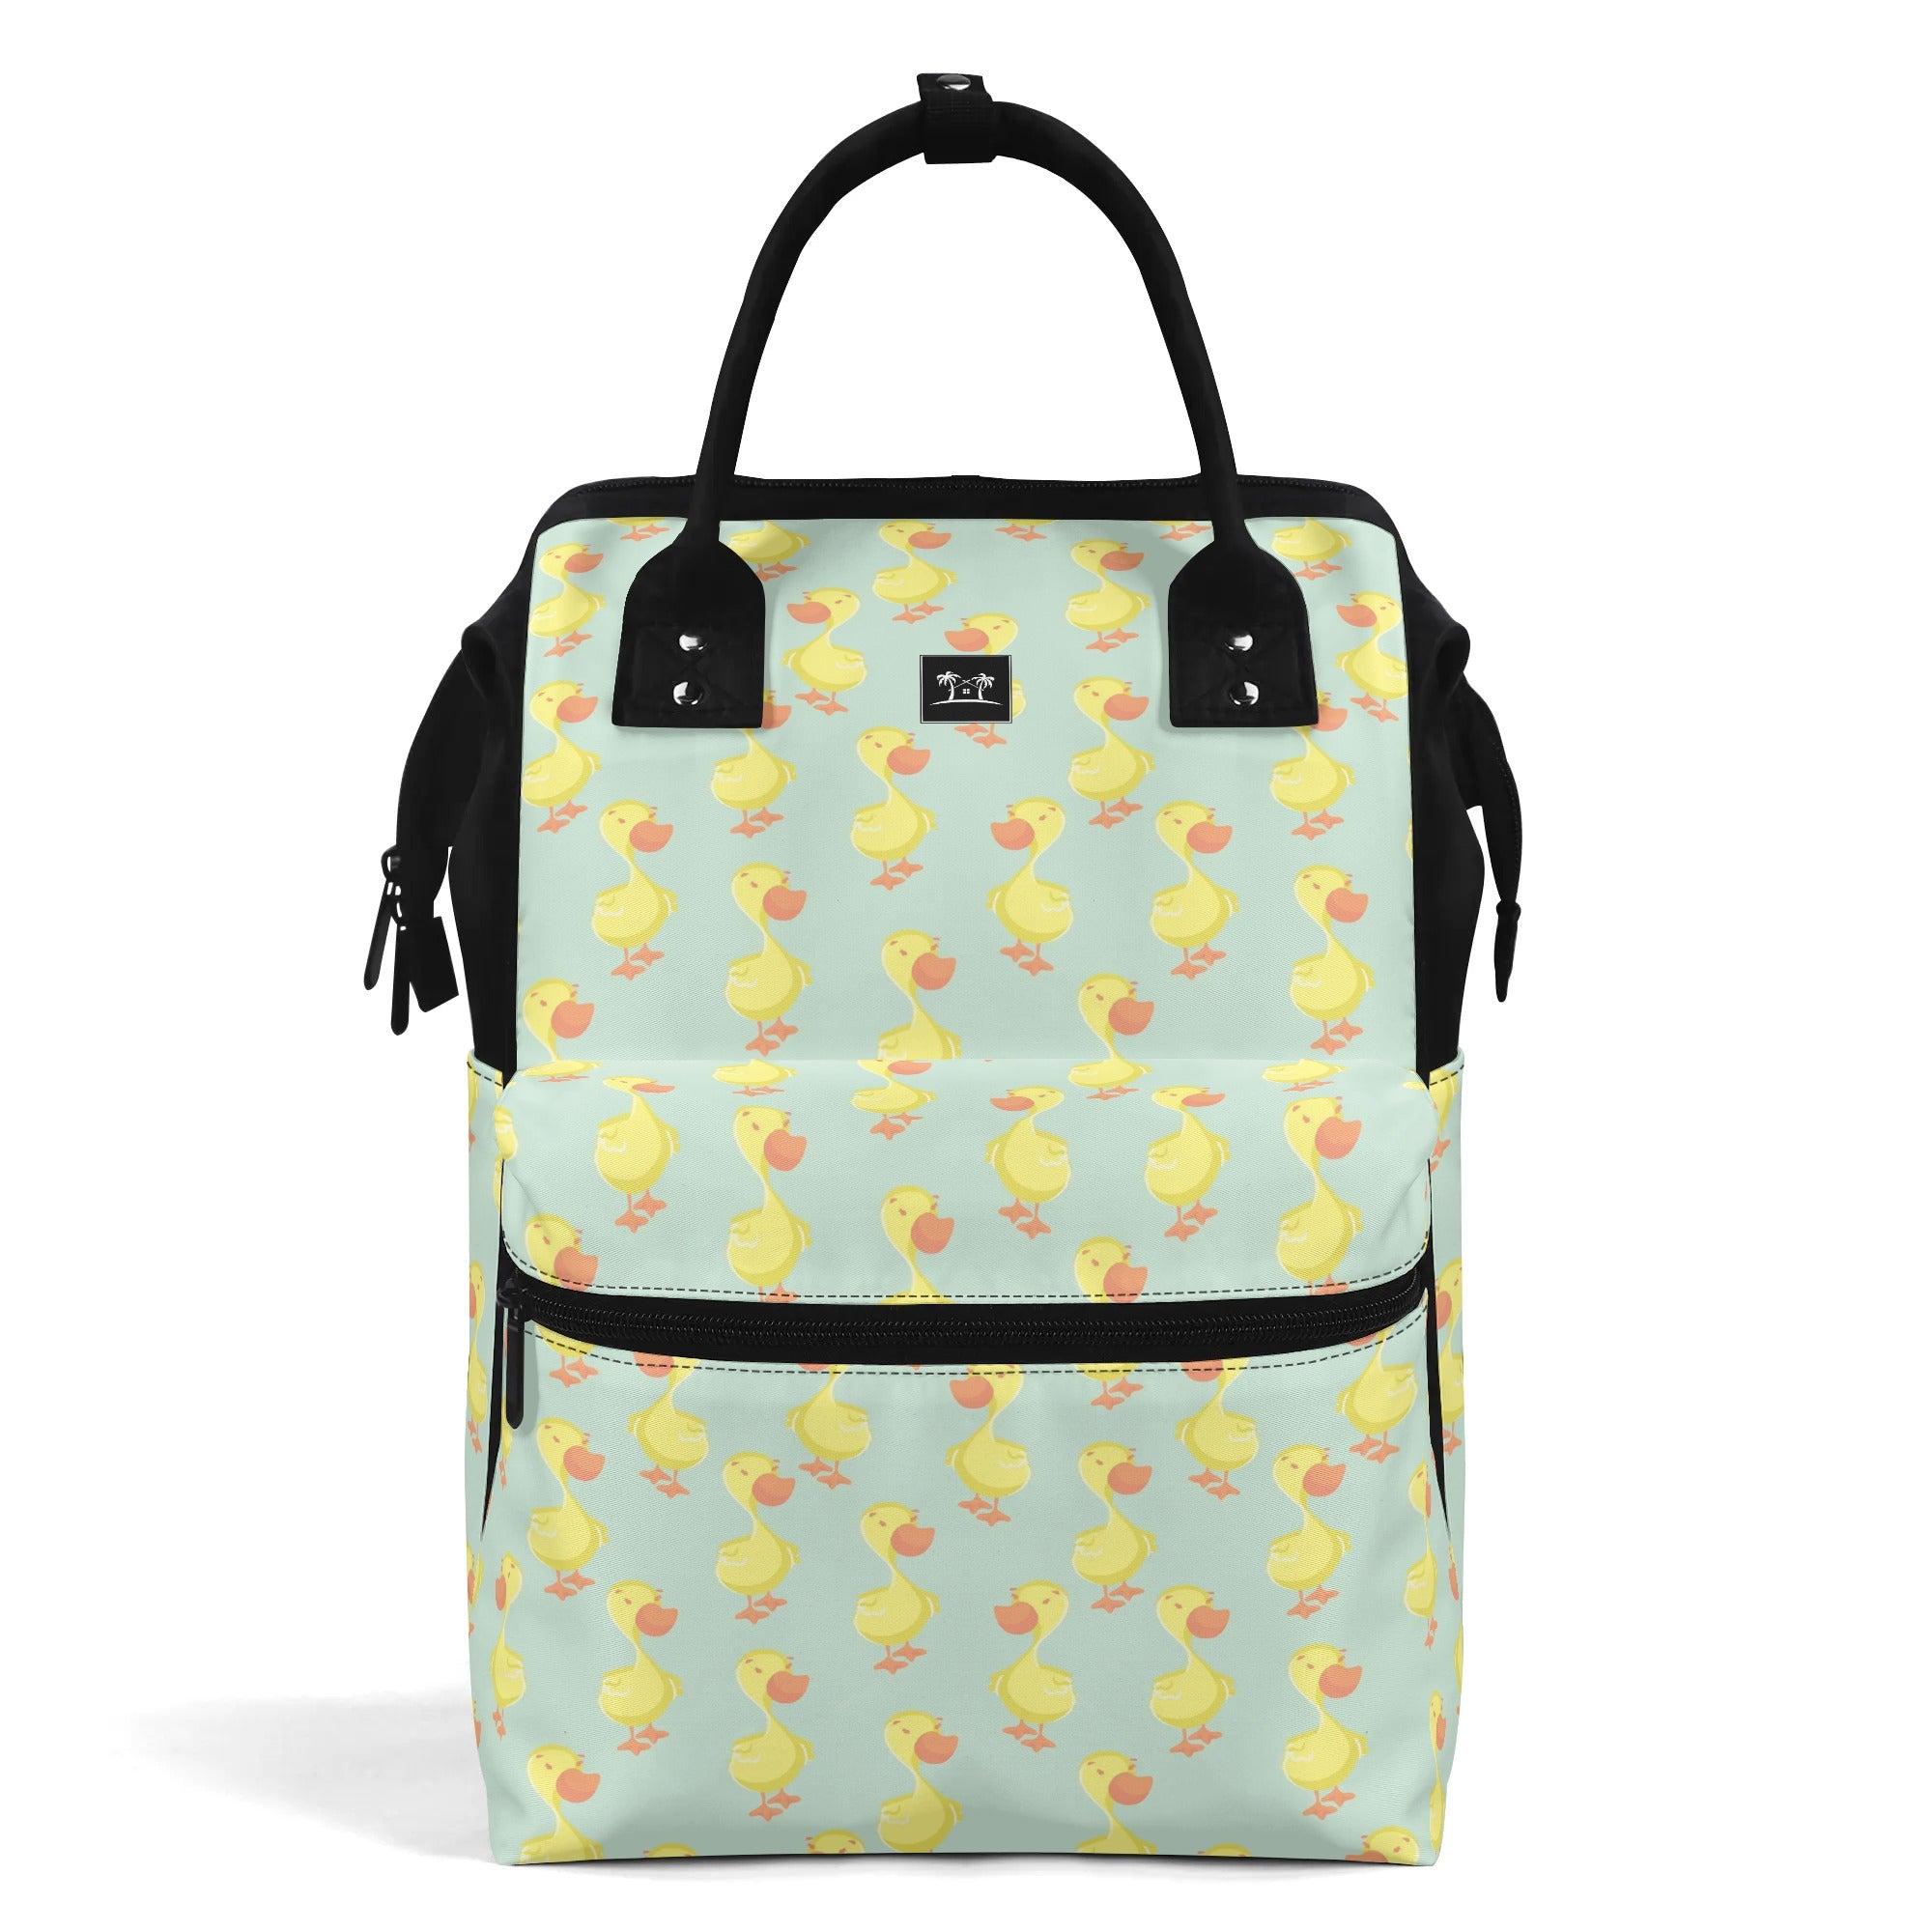 Large Capacity Diaper Backpack - Ducks in a Row (Mint)